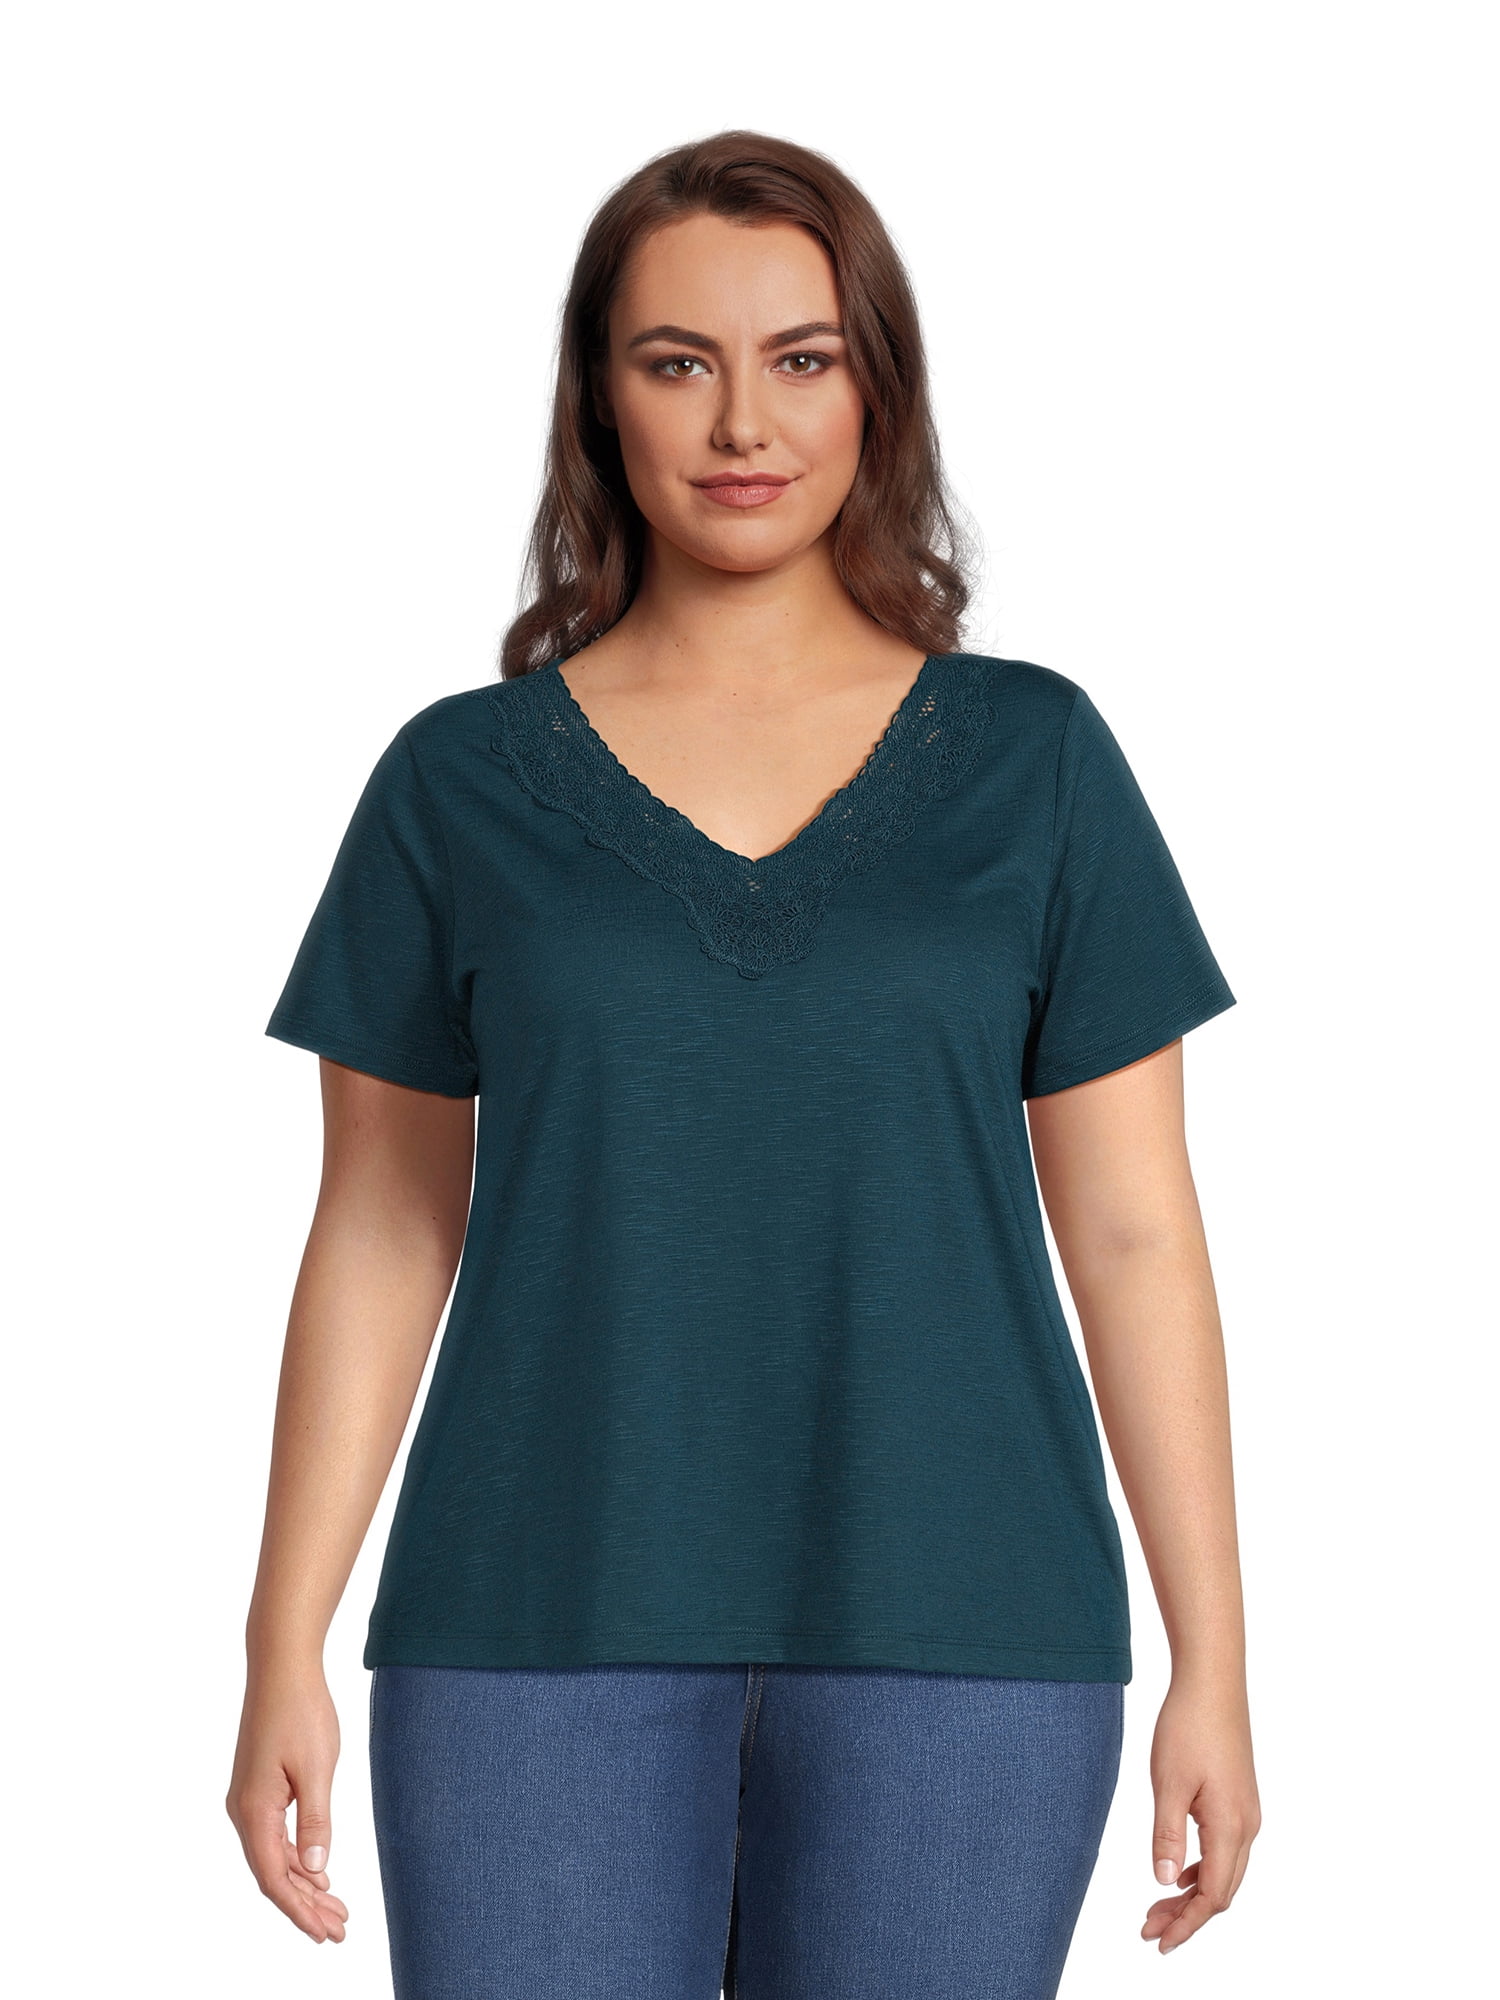 RealSize Women's Plus Size Lace V-Neck Tee with Short Sleeves 